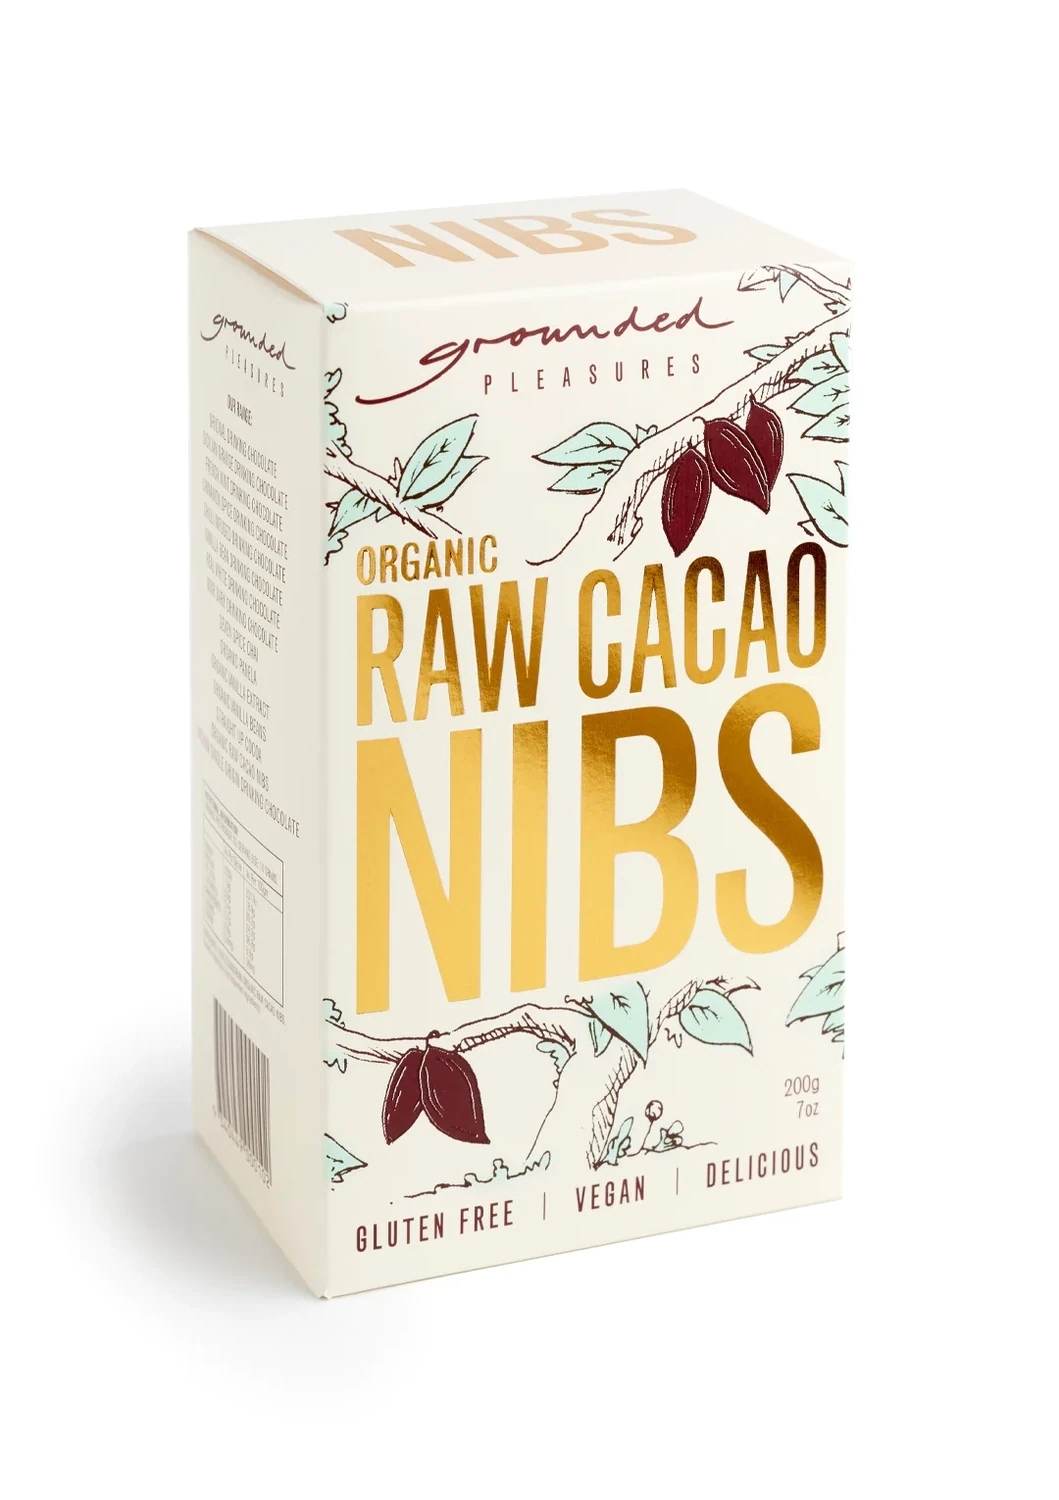 ​Grounded Pleasures - Organic Raw Cacao Nibs - 200g